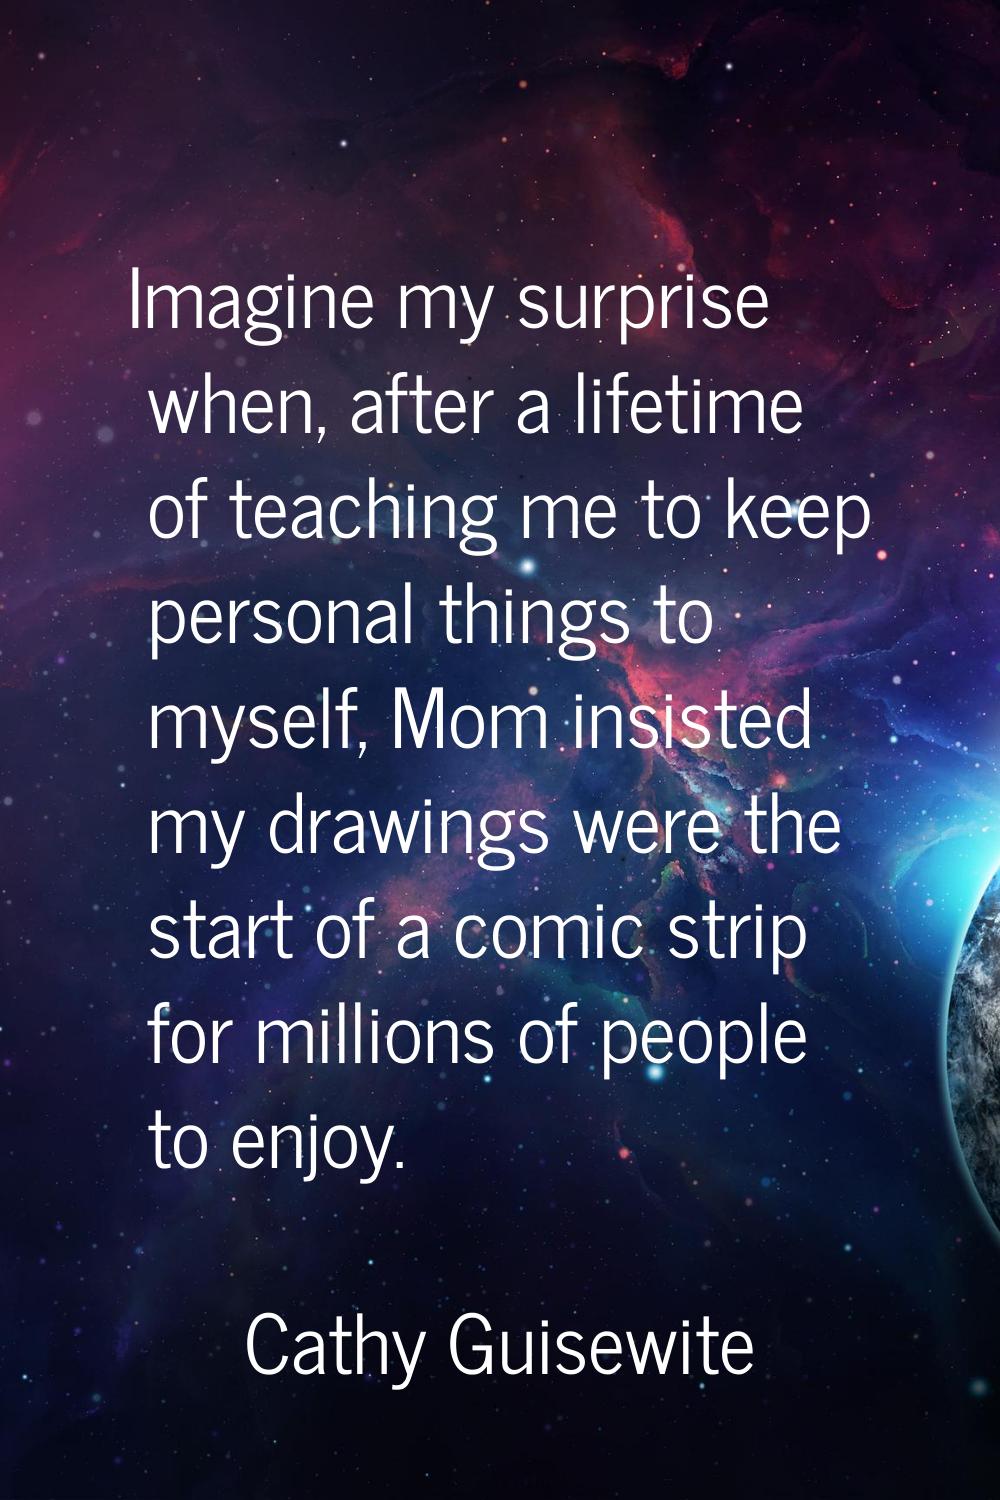 Imagine my surprise when, after a lifetime of teaching me to keep personal things to myself, Mom in